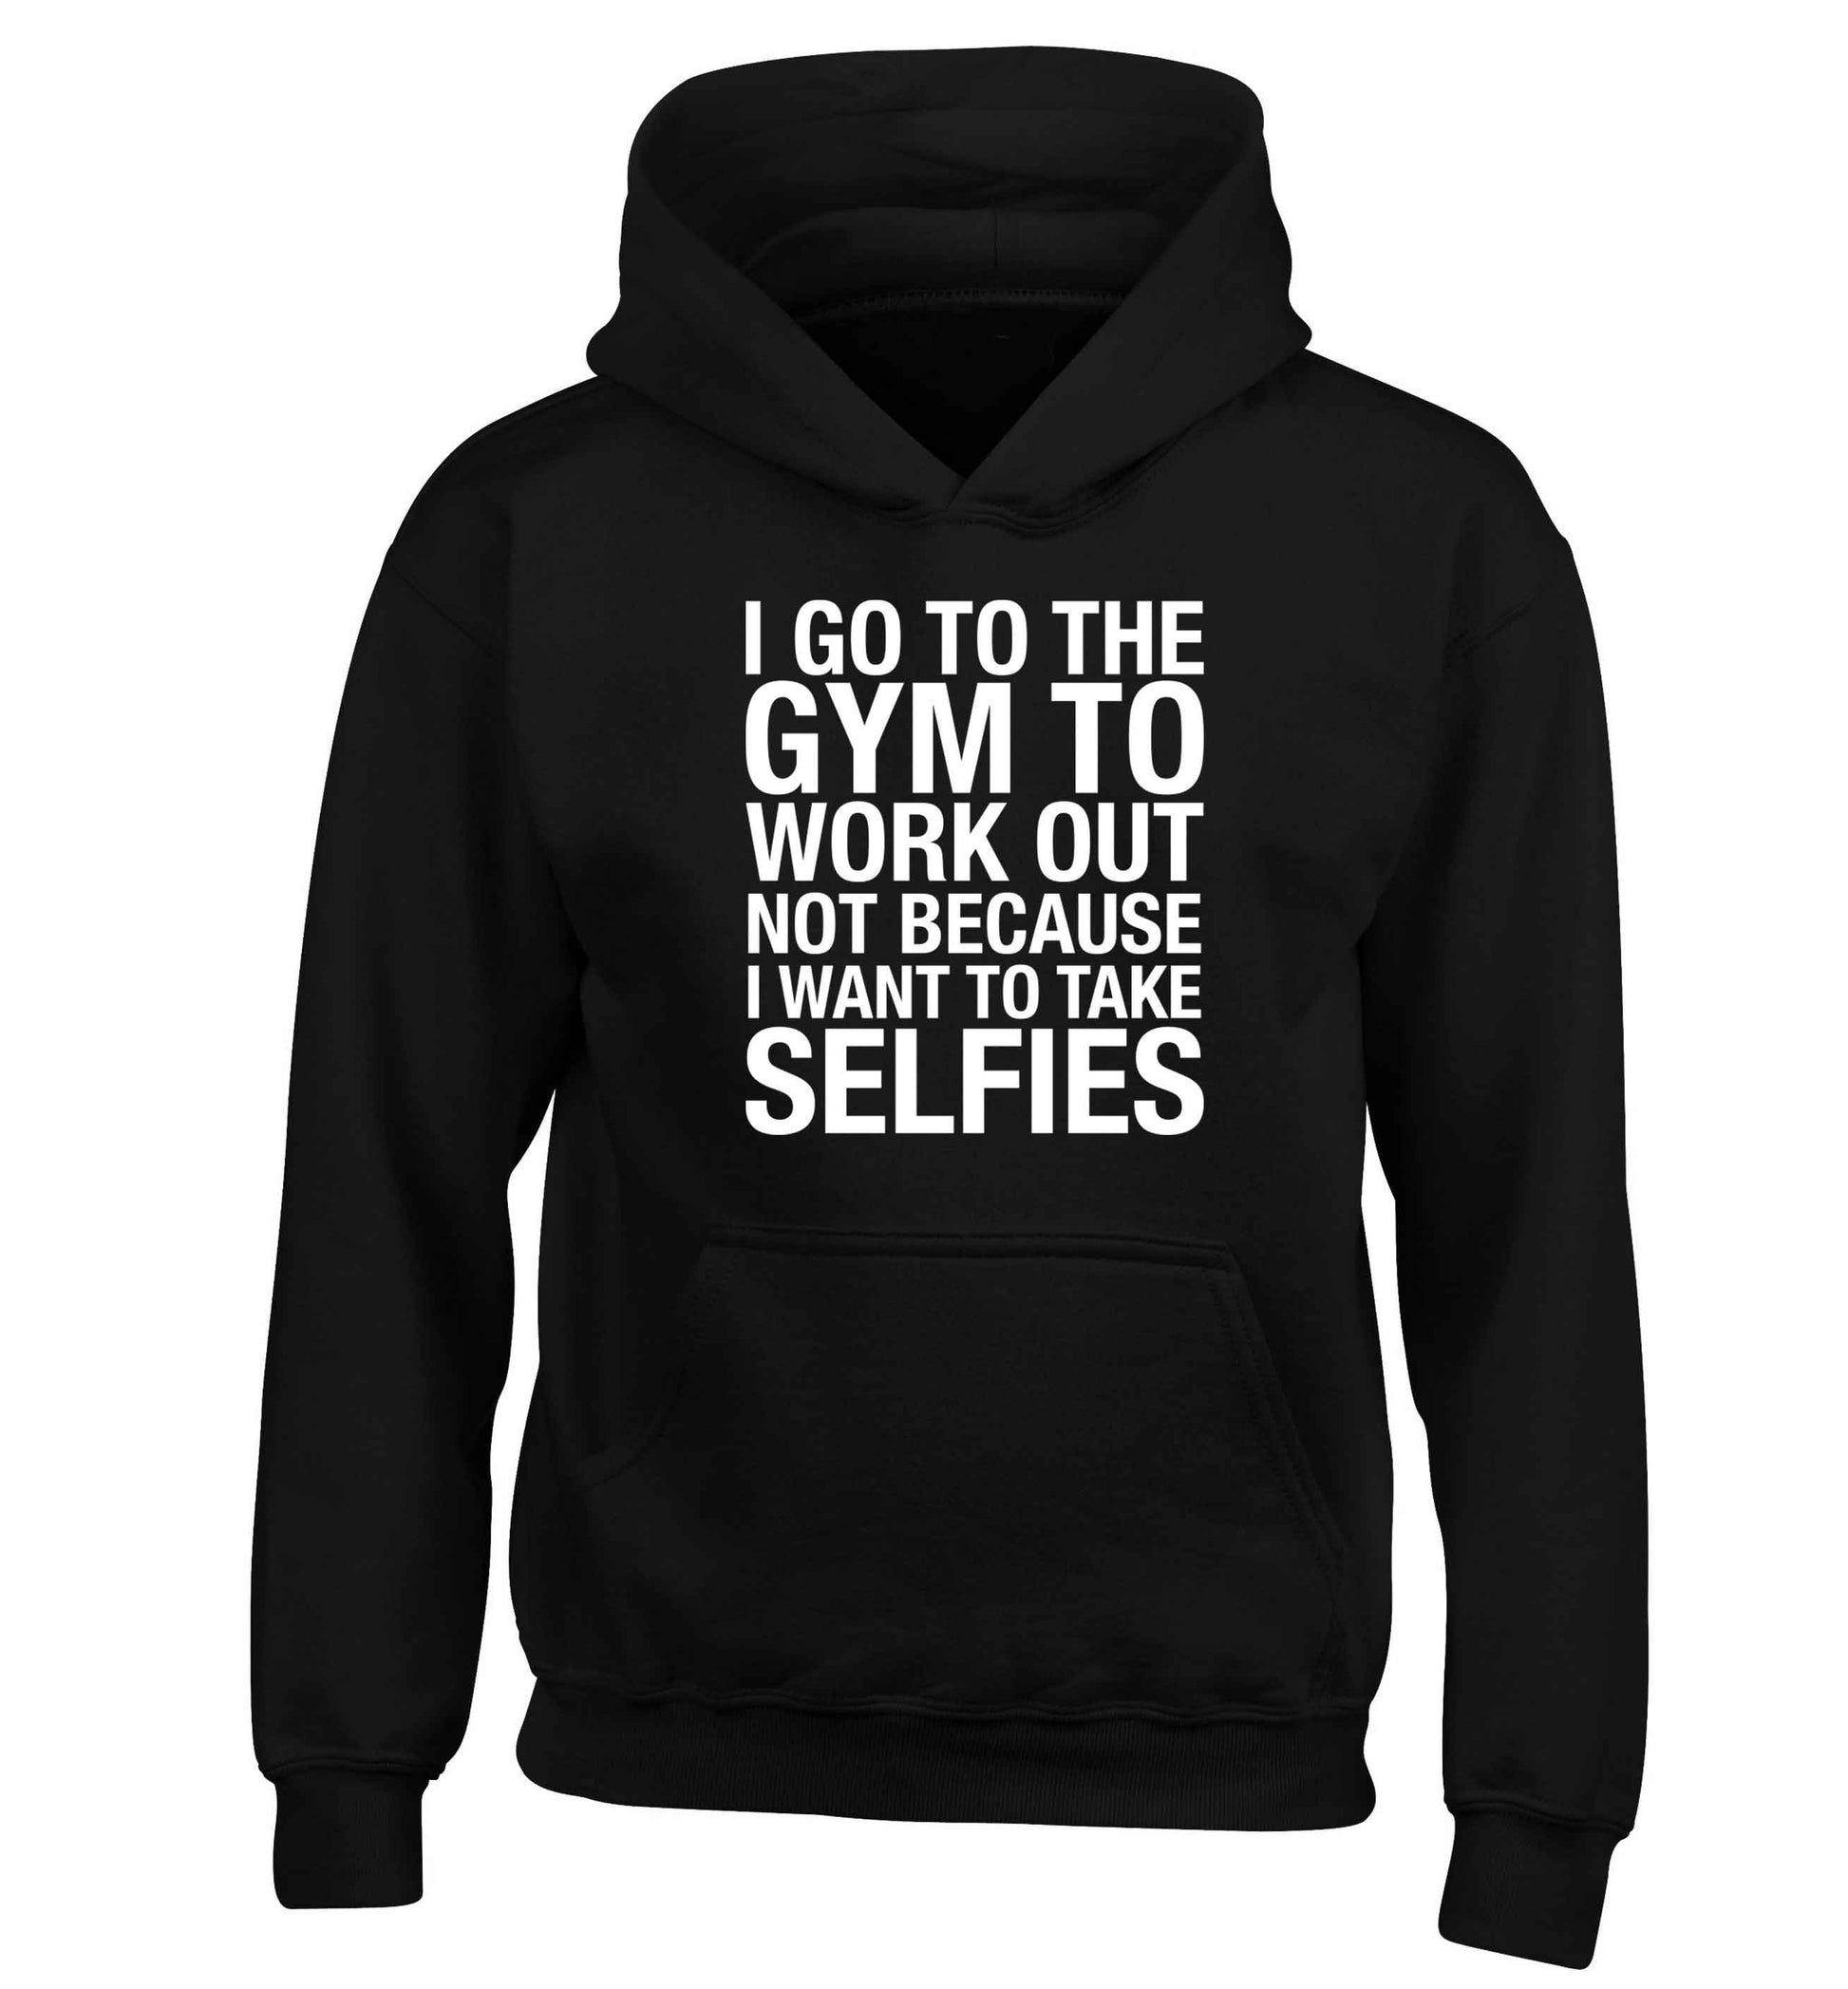 I go to the gym to workout not to take selfies children's black hoodie 12-13 Years